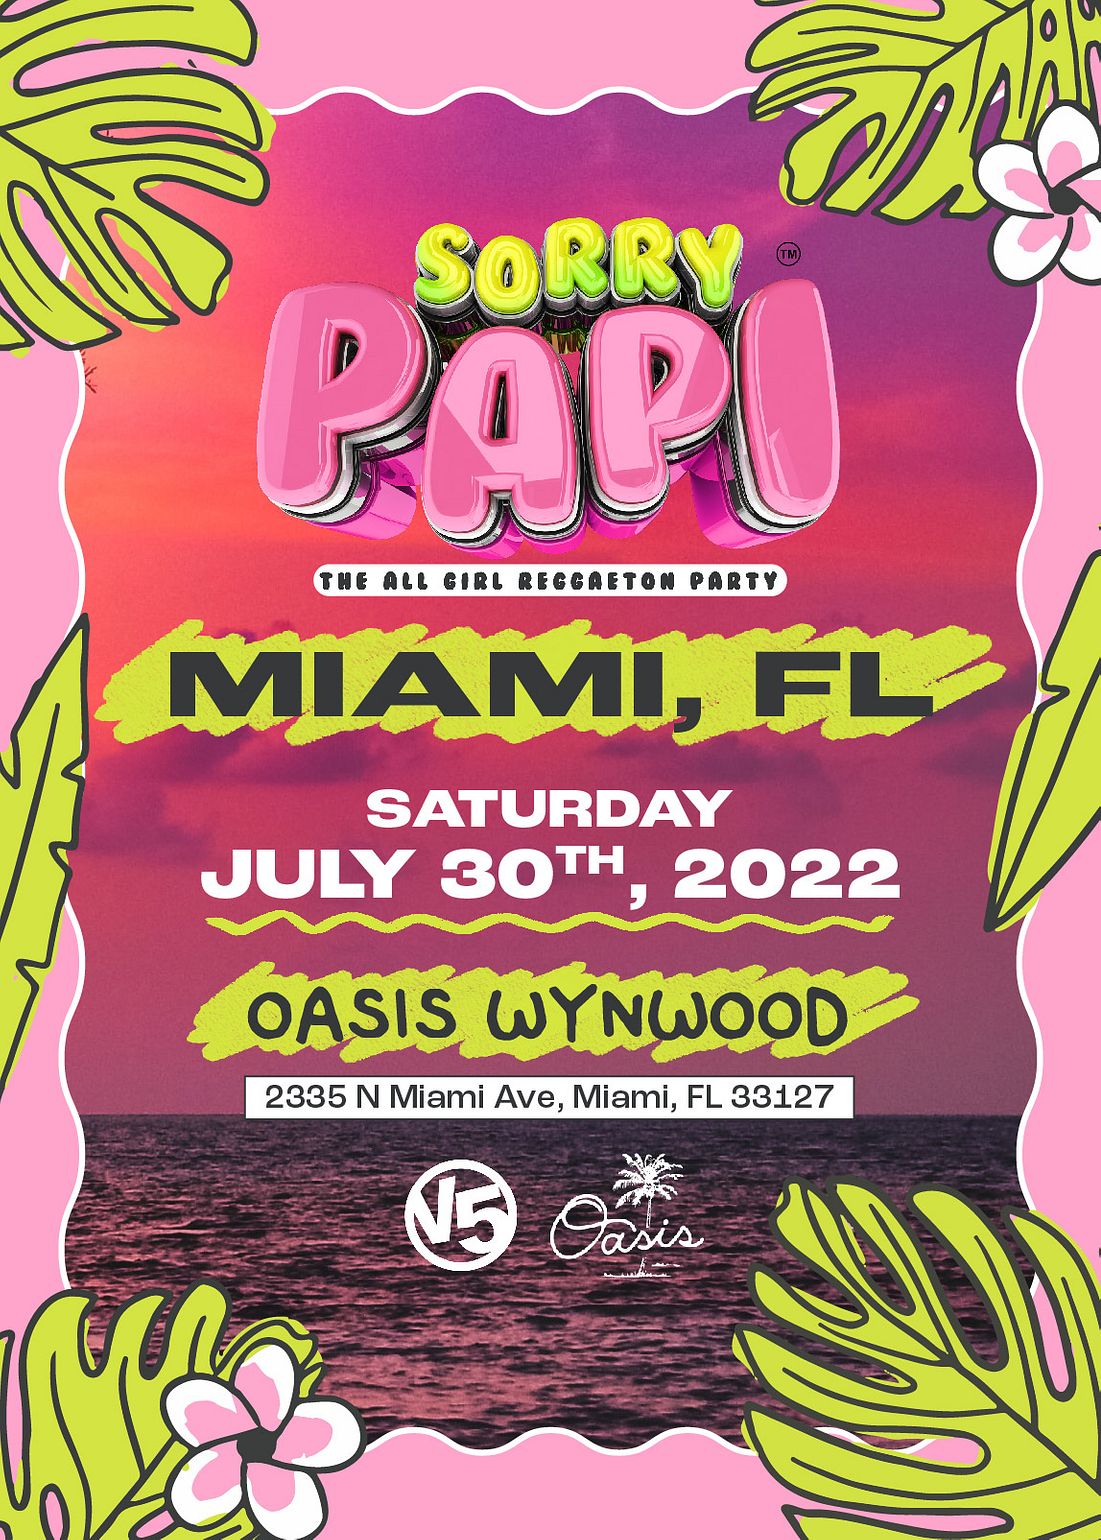 Sorry Papi Tour The All Girl Reggaeton Party Tickets At Oasis Wynwood In Miami By Oasis Wynwood